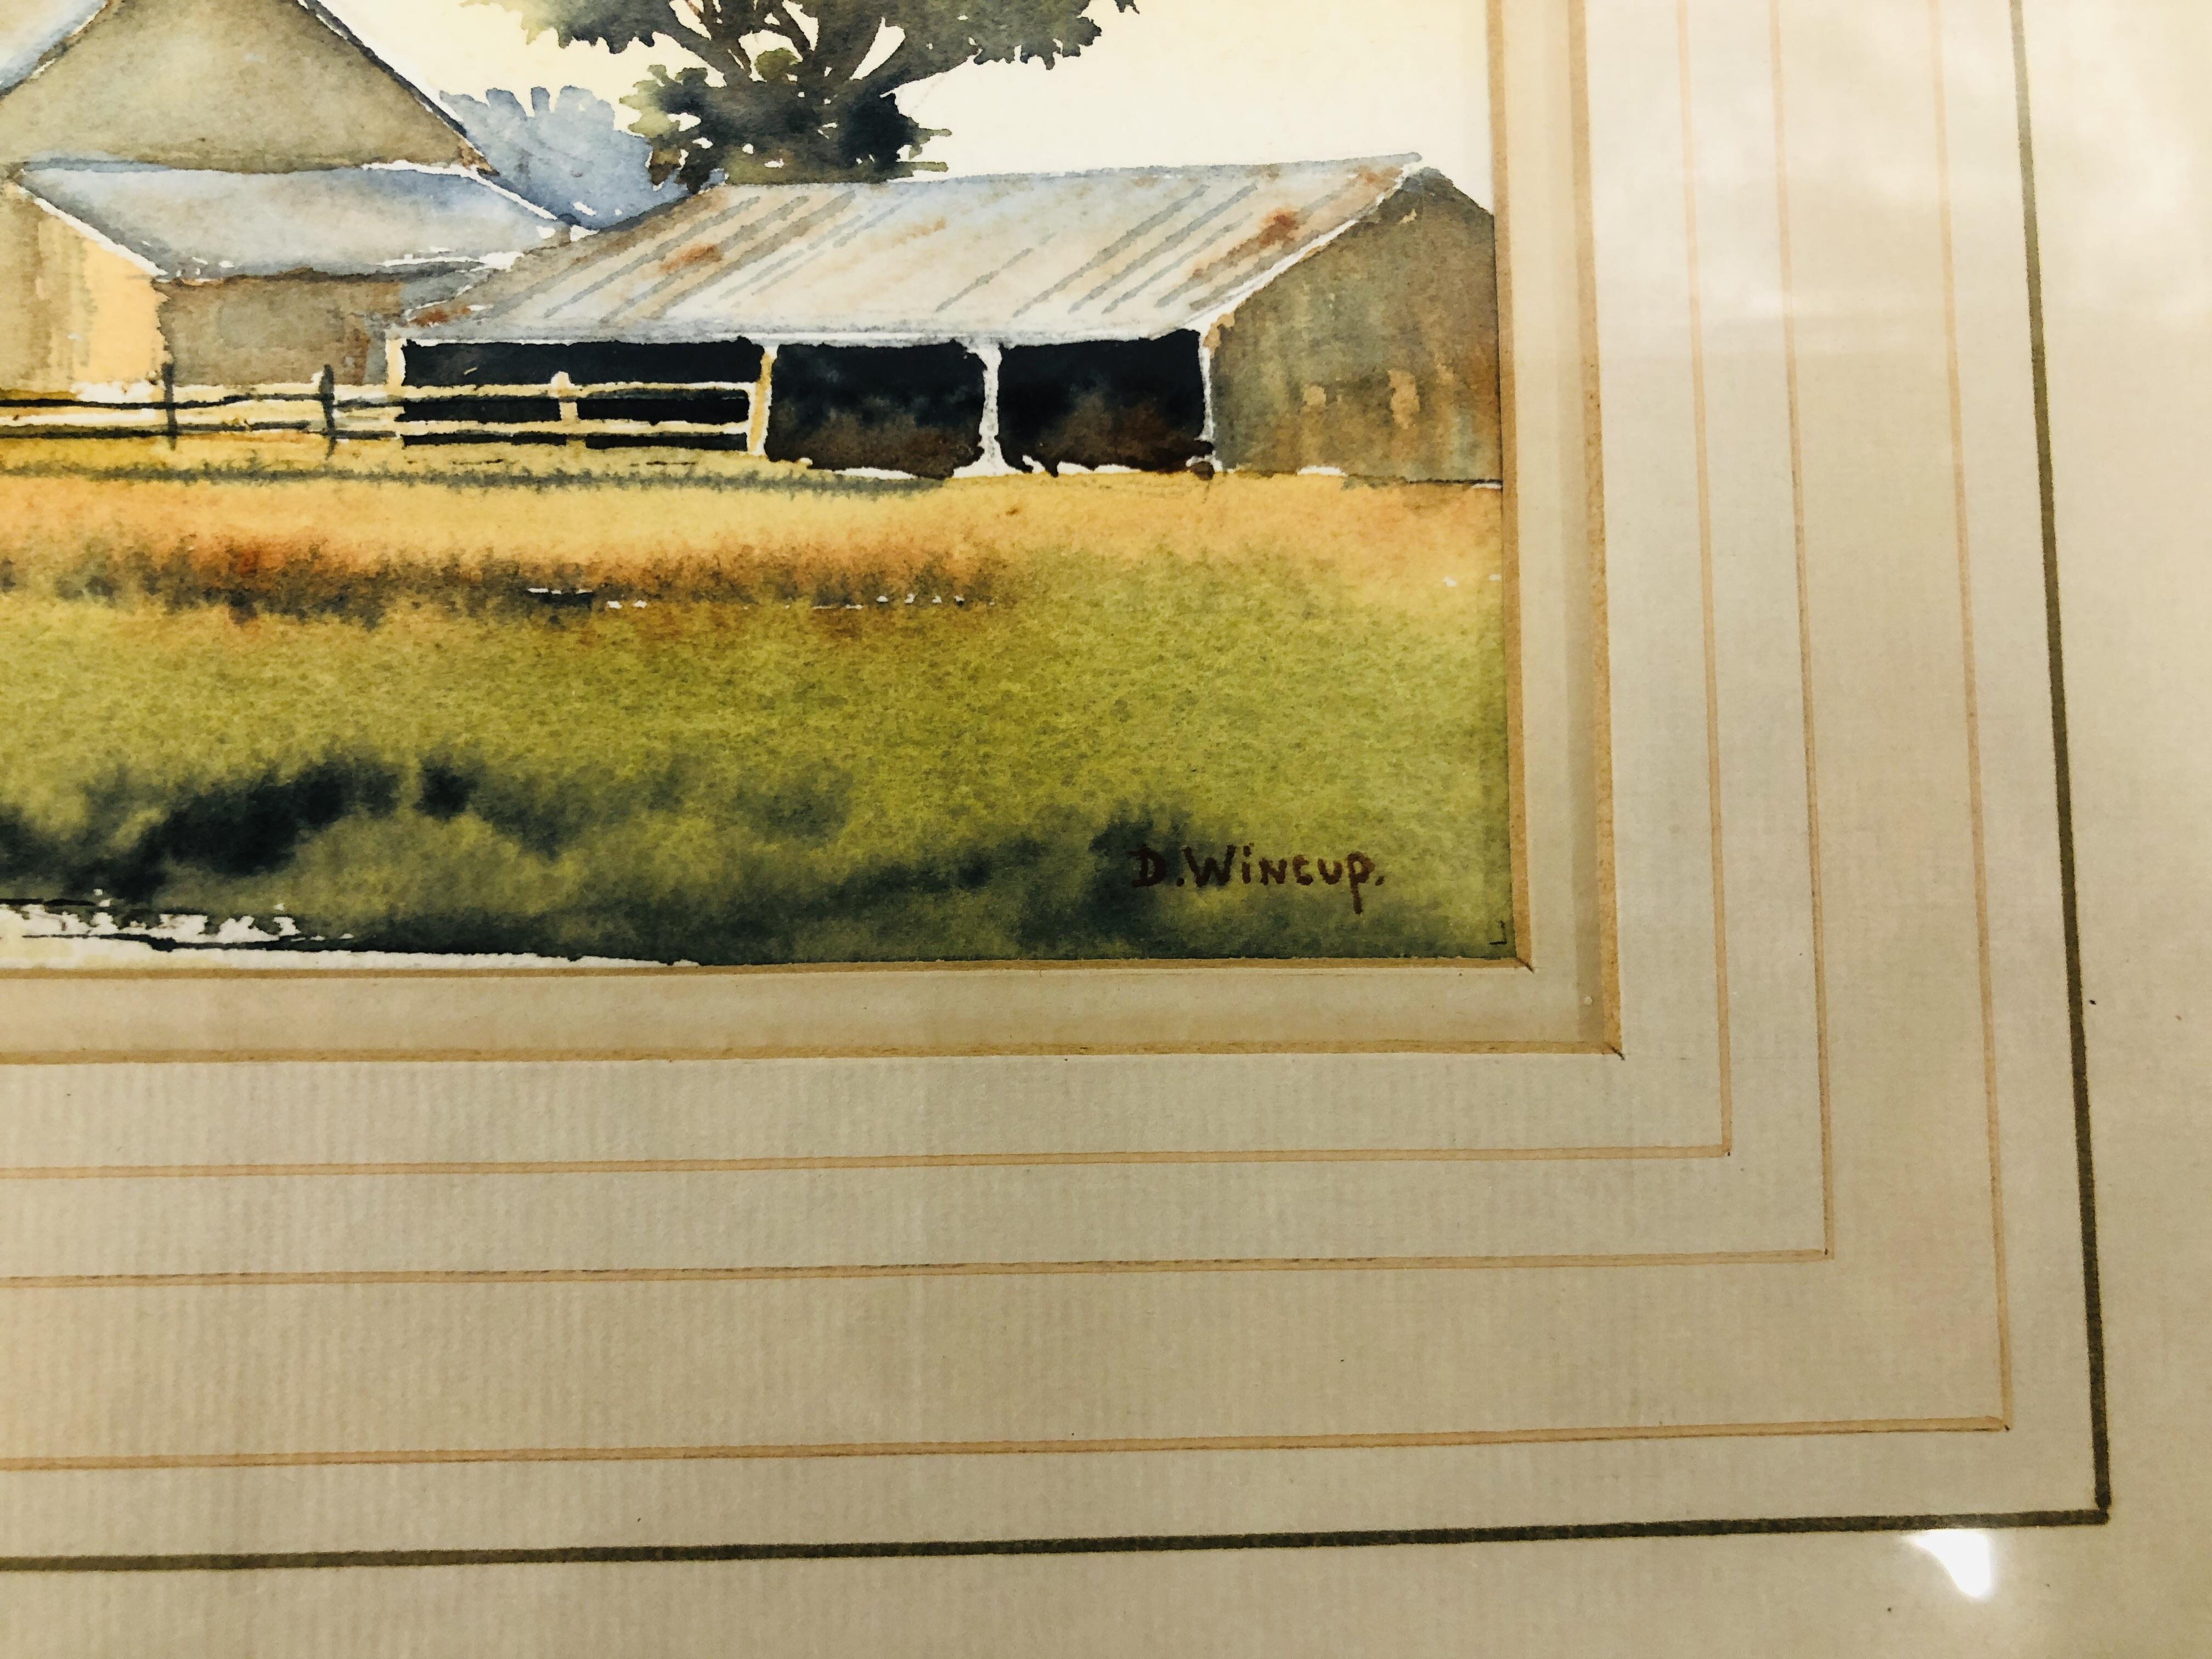 AN ORIGINAL FRAMED WATERCOLOUR "SUTTON MILL" BEARING SIGNATURE D. WINCUP - W 33.5CM. X H 20CM. - Image 3 of 5